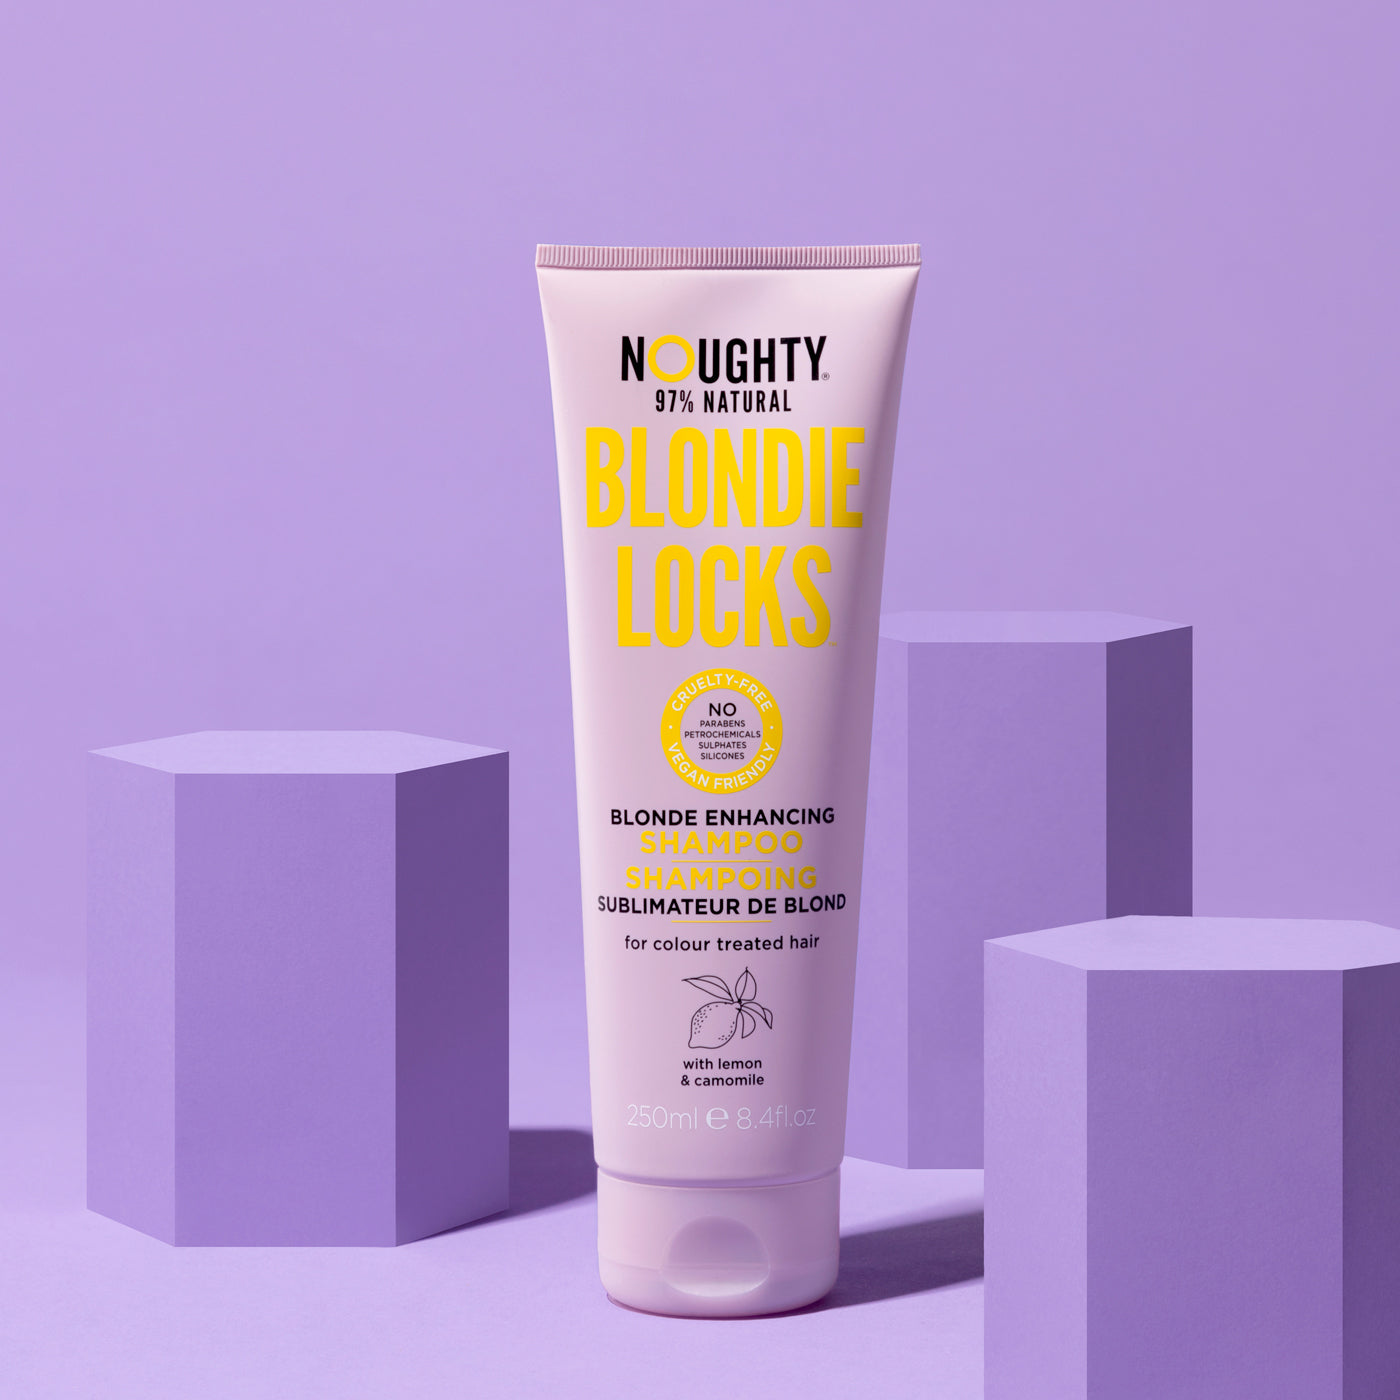 Noughty's blonde enhancing brightening shampoo for blonde bleached highlighted hair. Natural haircare vegan cruelty free natural sulphate free paraben free